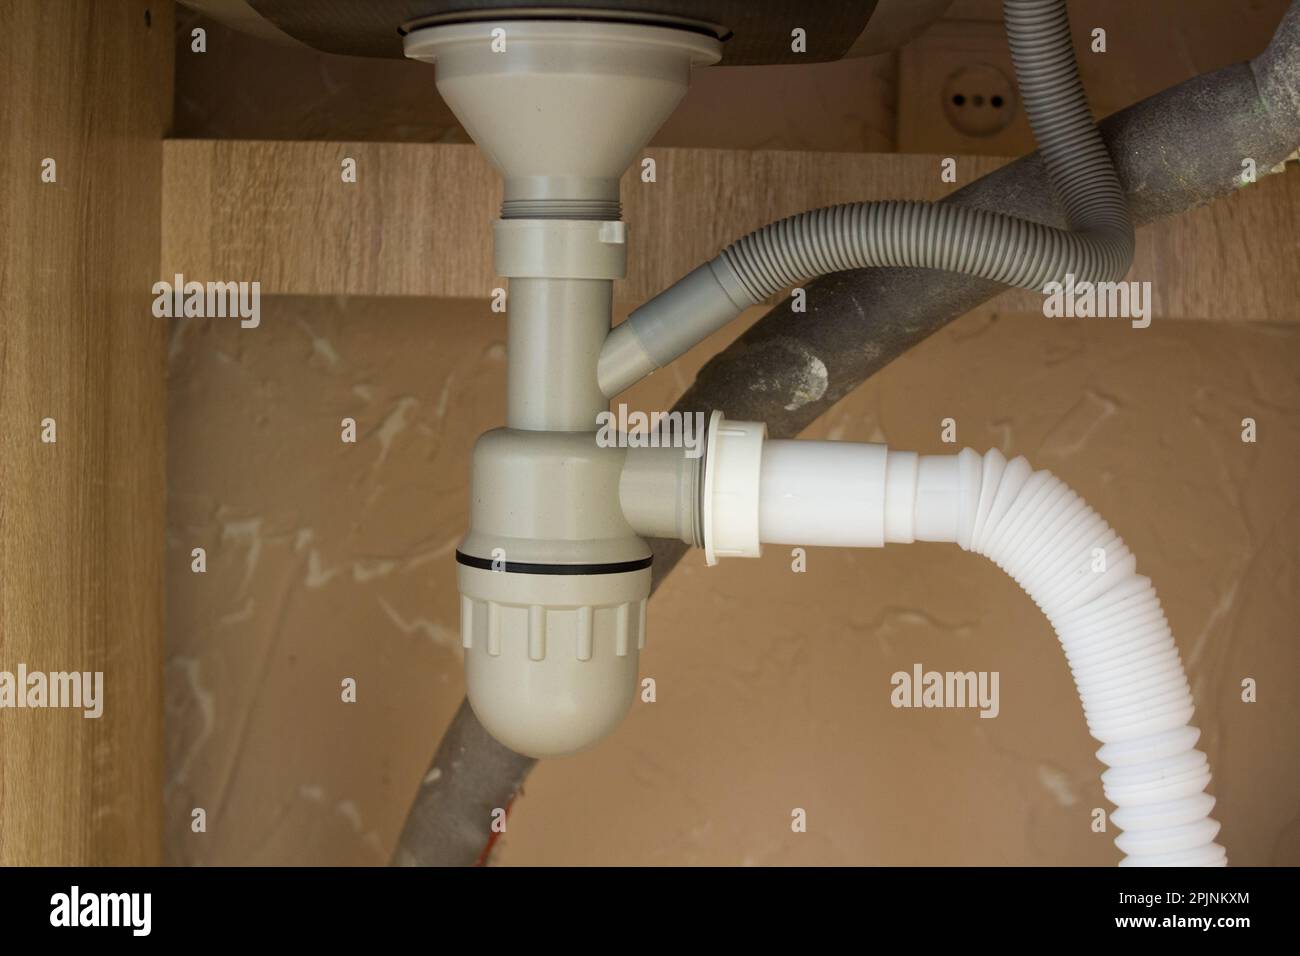 Siphon pipes under the kitchen sink in the kitchen Stock Photo